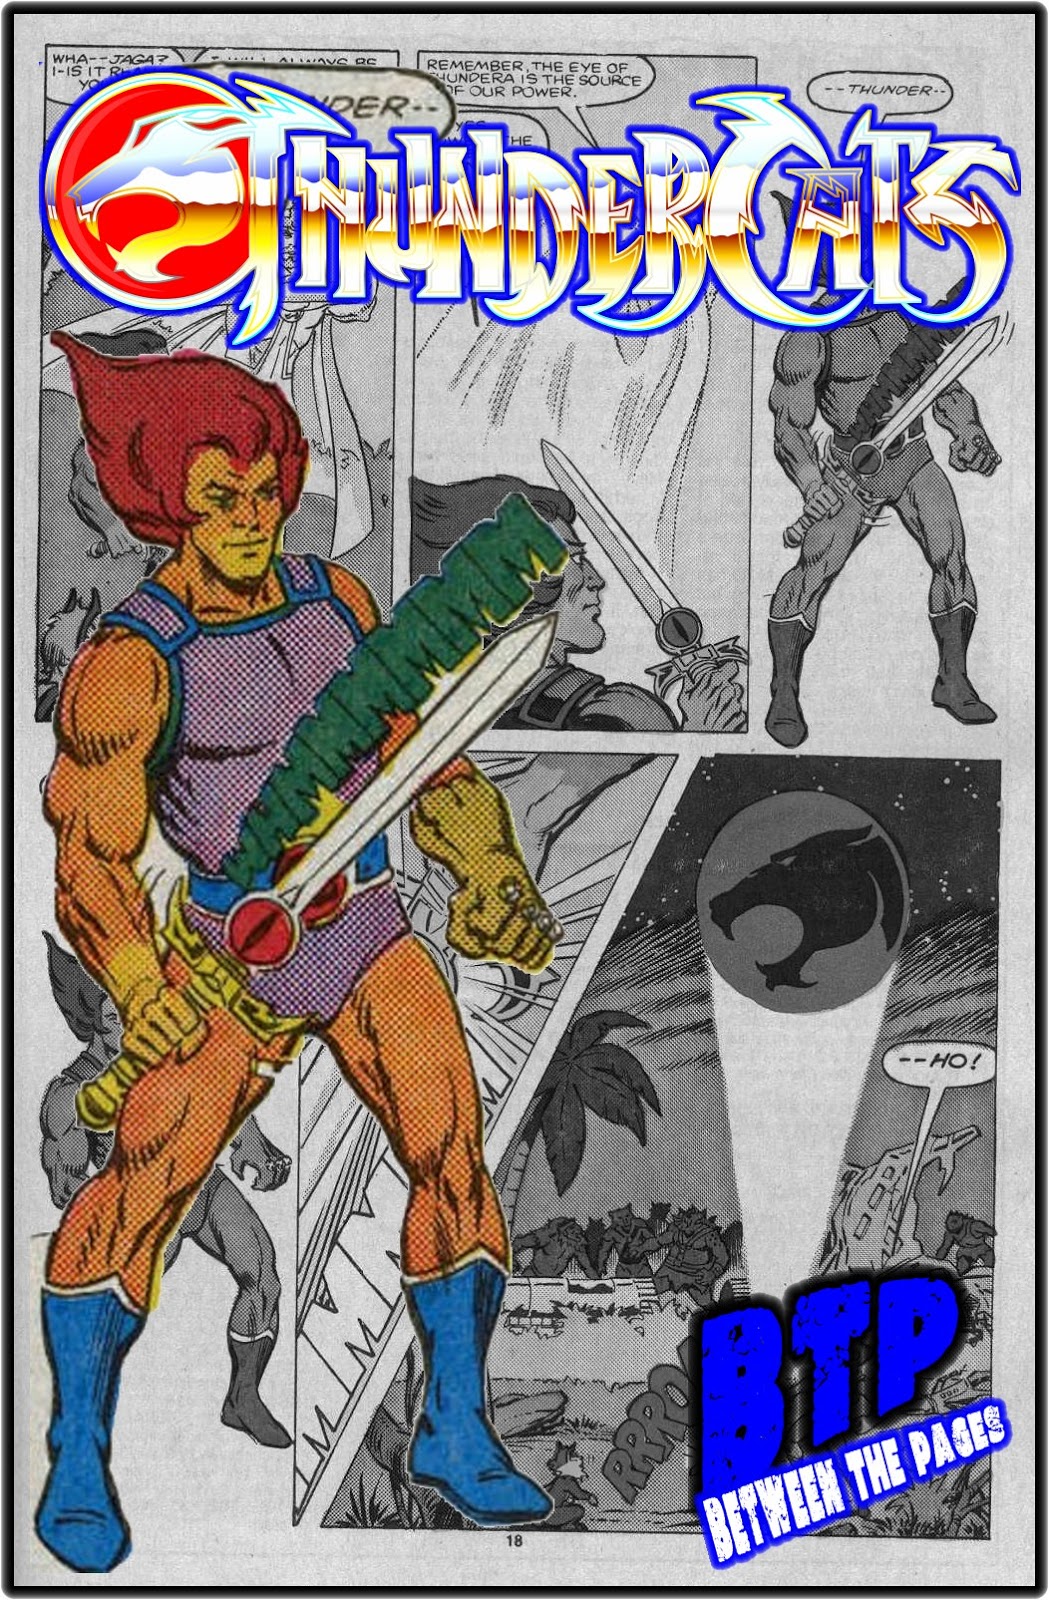 Lion-O and The Sword of Omens